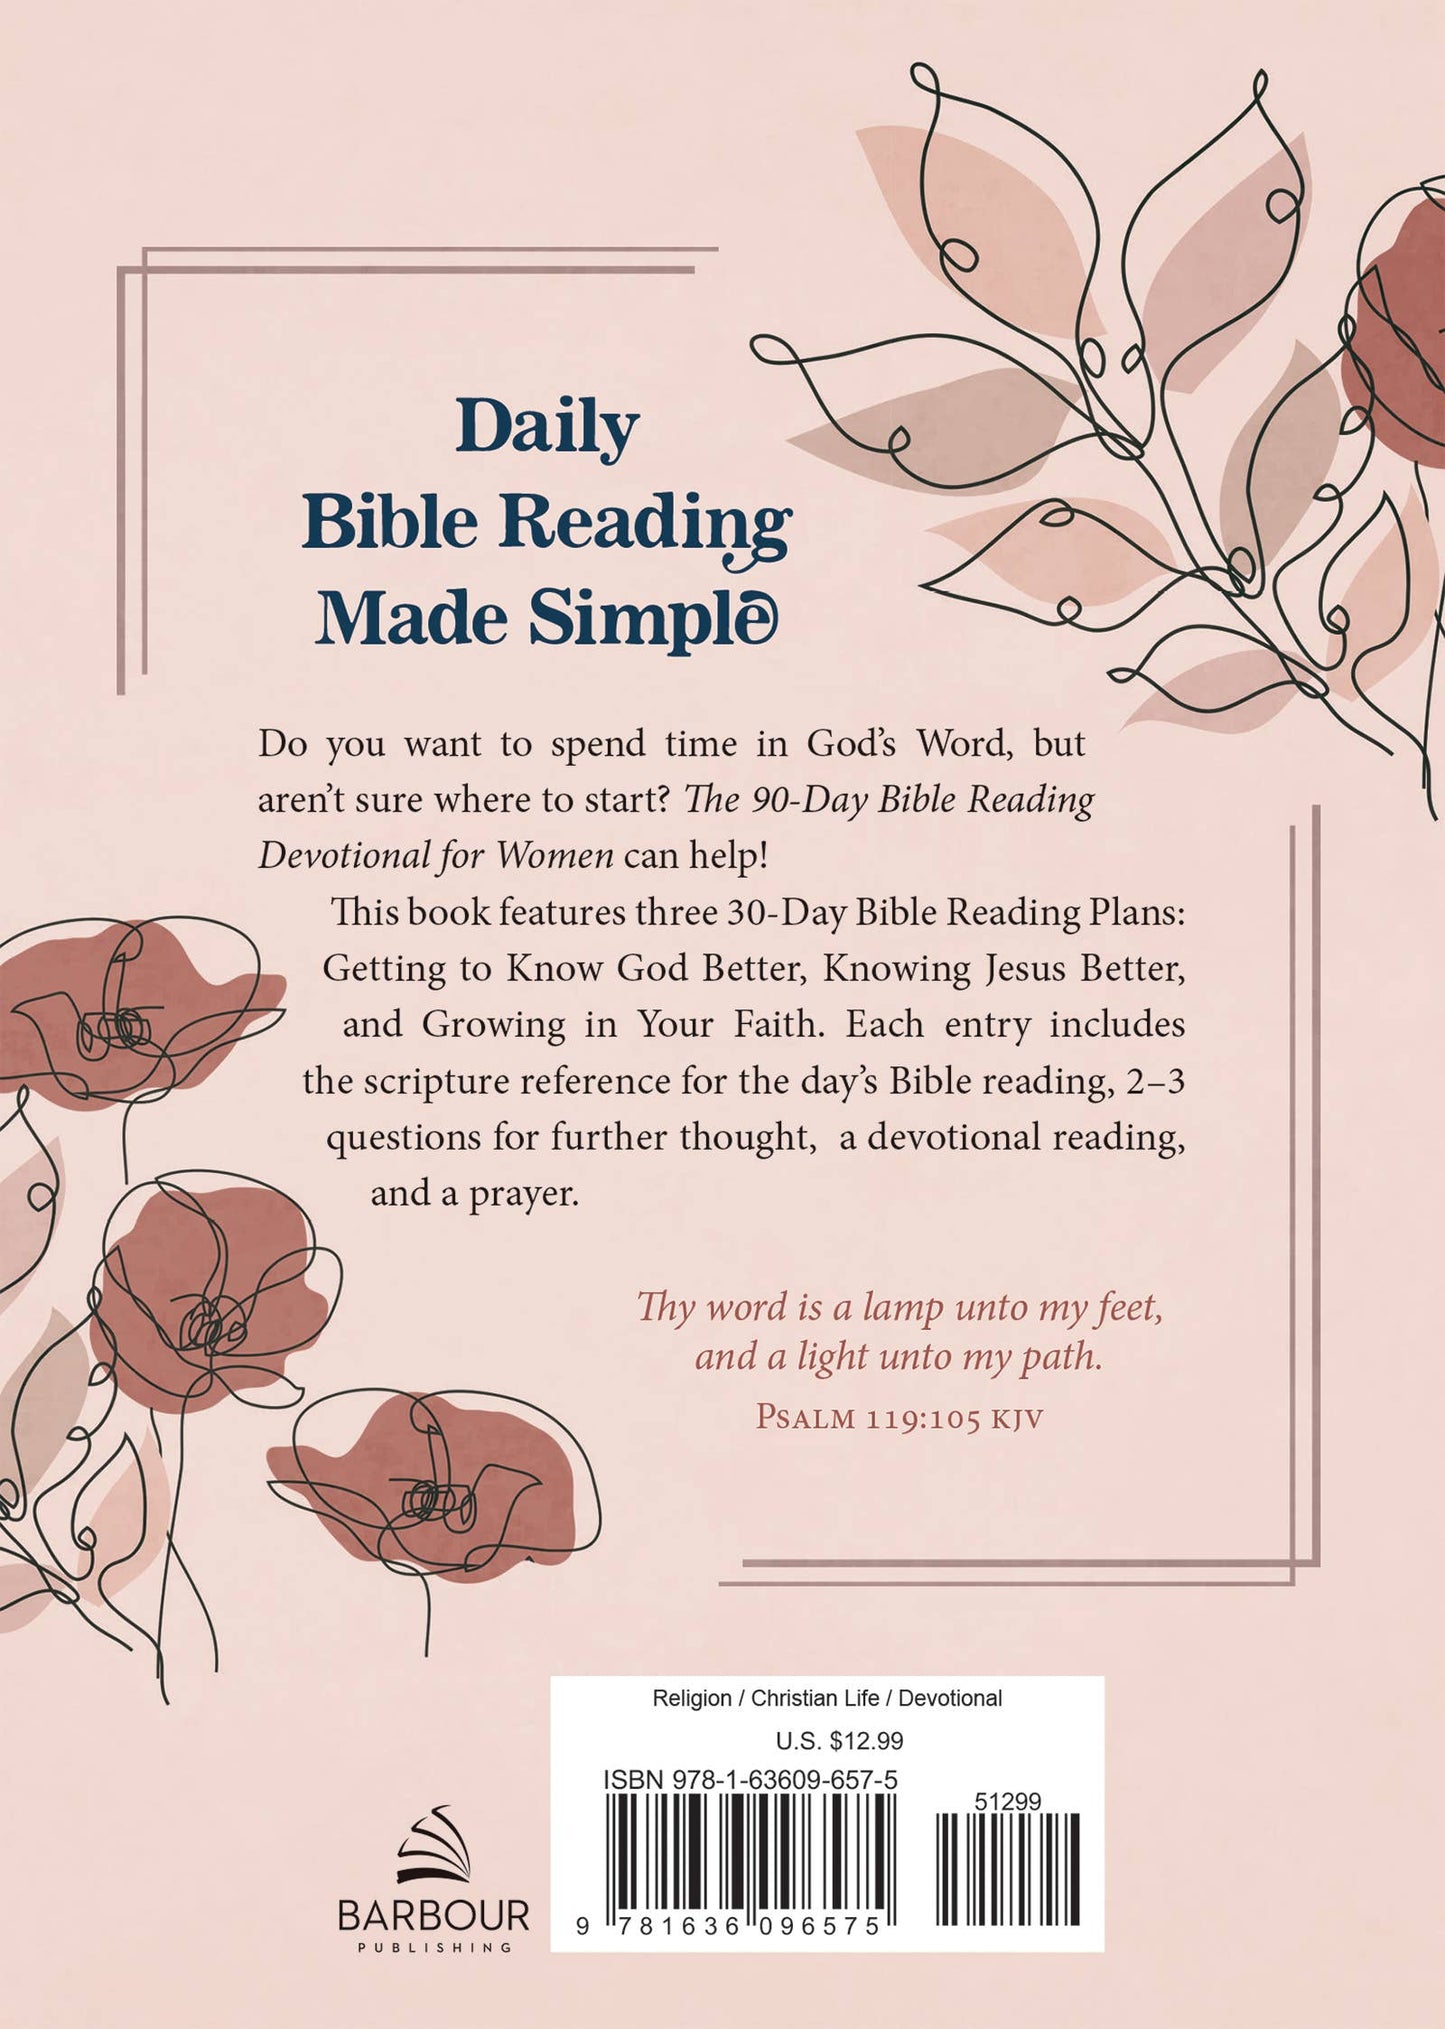 The 90-Day Bible Reading Devotional for Women